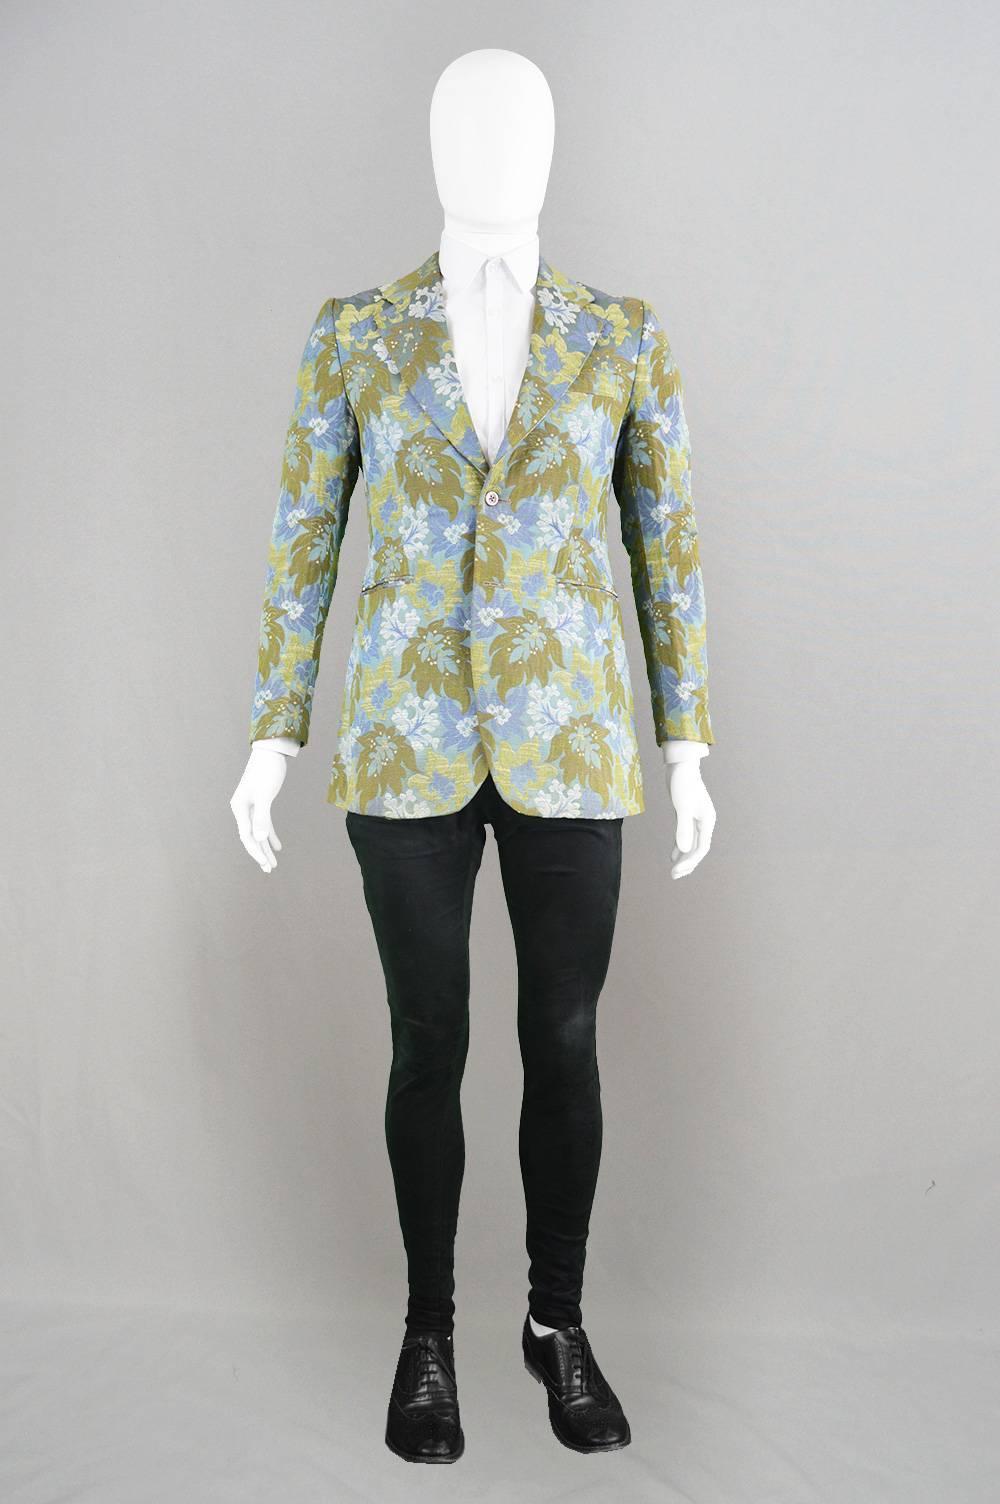 An incredibly rare and museum worthy vintage men's blazer from the late 1960s by one of the best French designers and haute couturiers of the 20th Century, Maggy Rouff. Best known for her women's creations, this is a rare and breathtaking piece, not